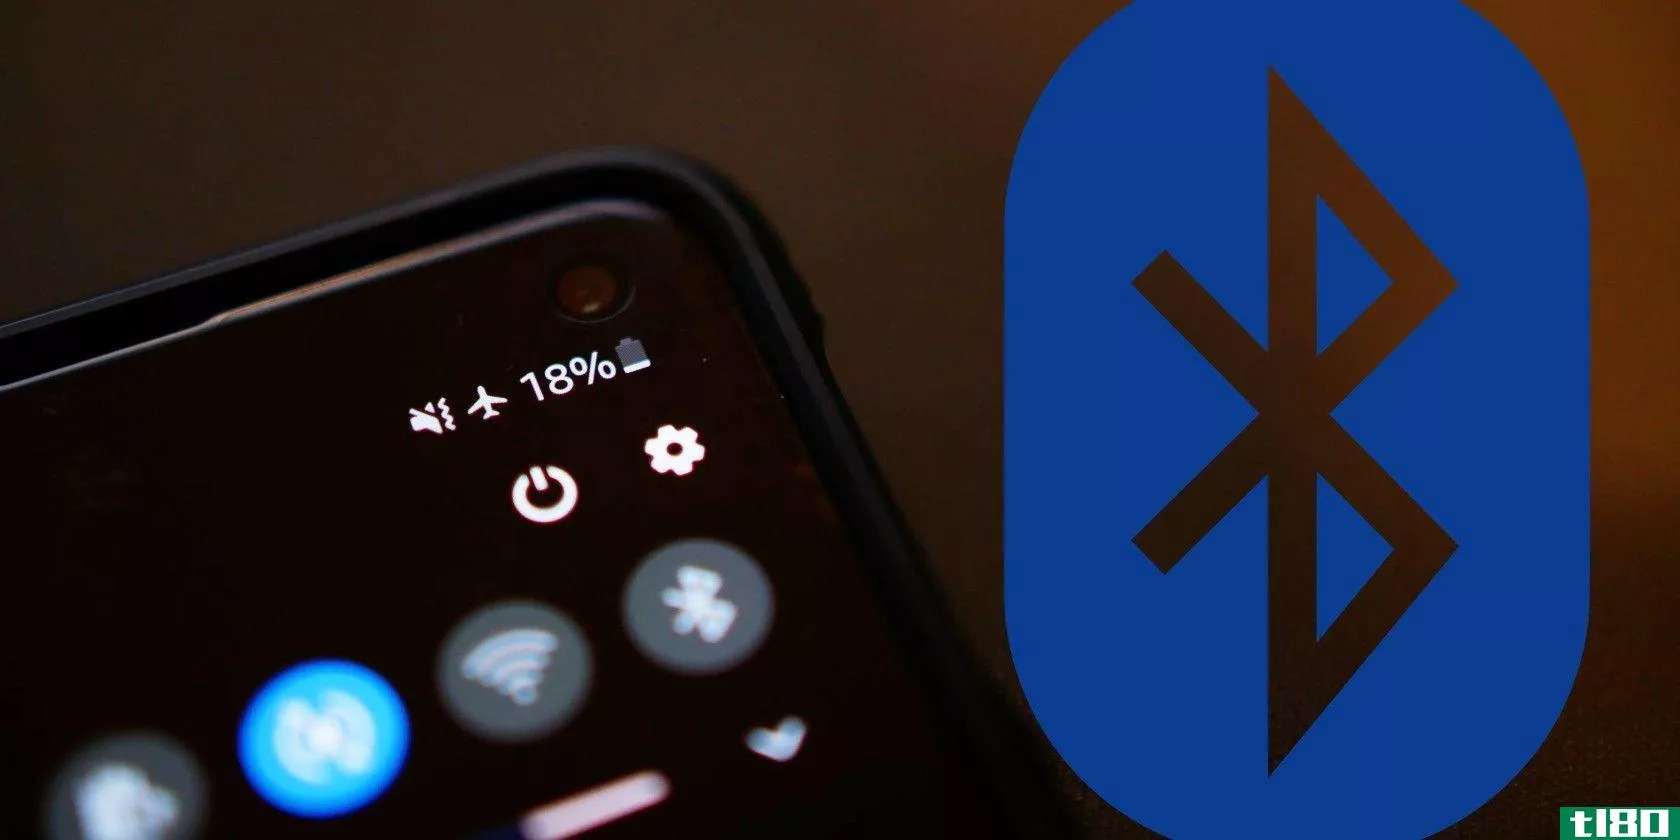 protecting yourself from Bluetooth hacking